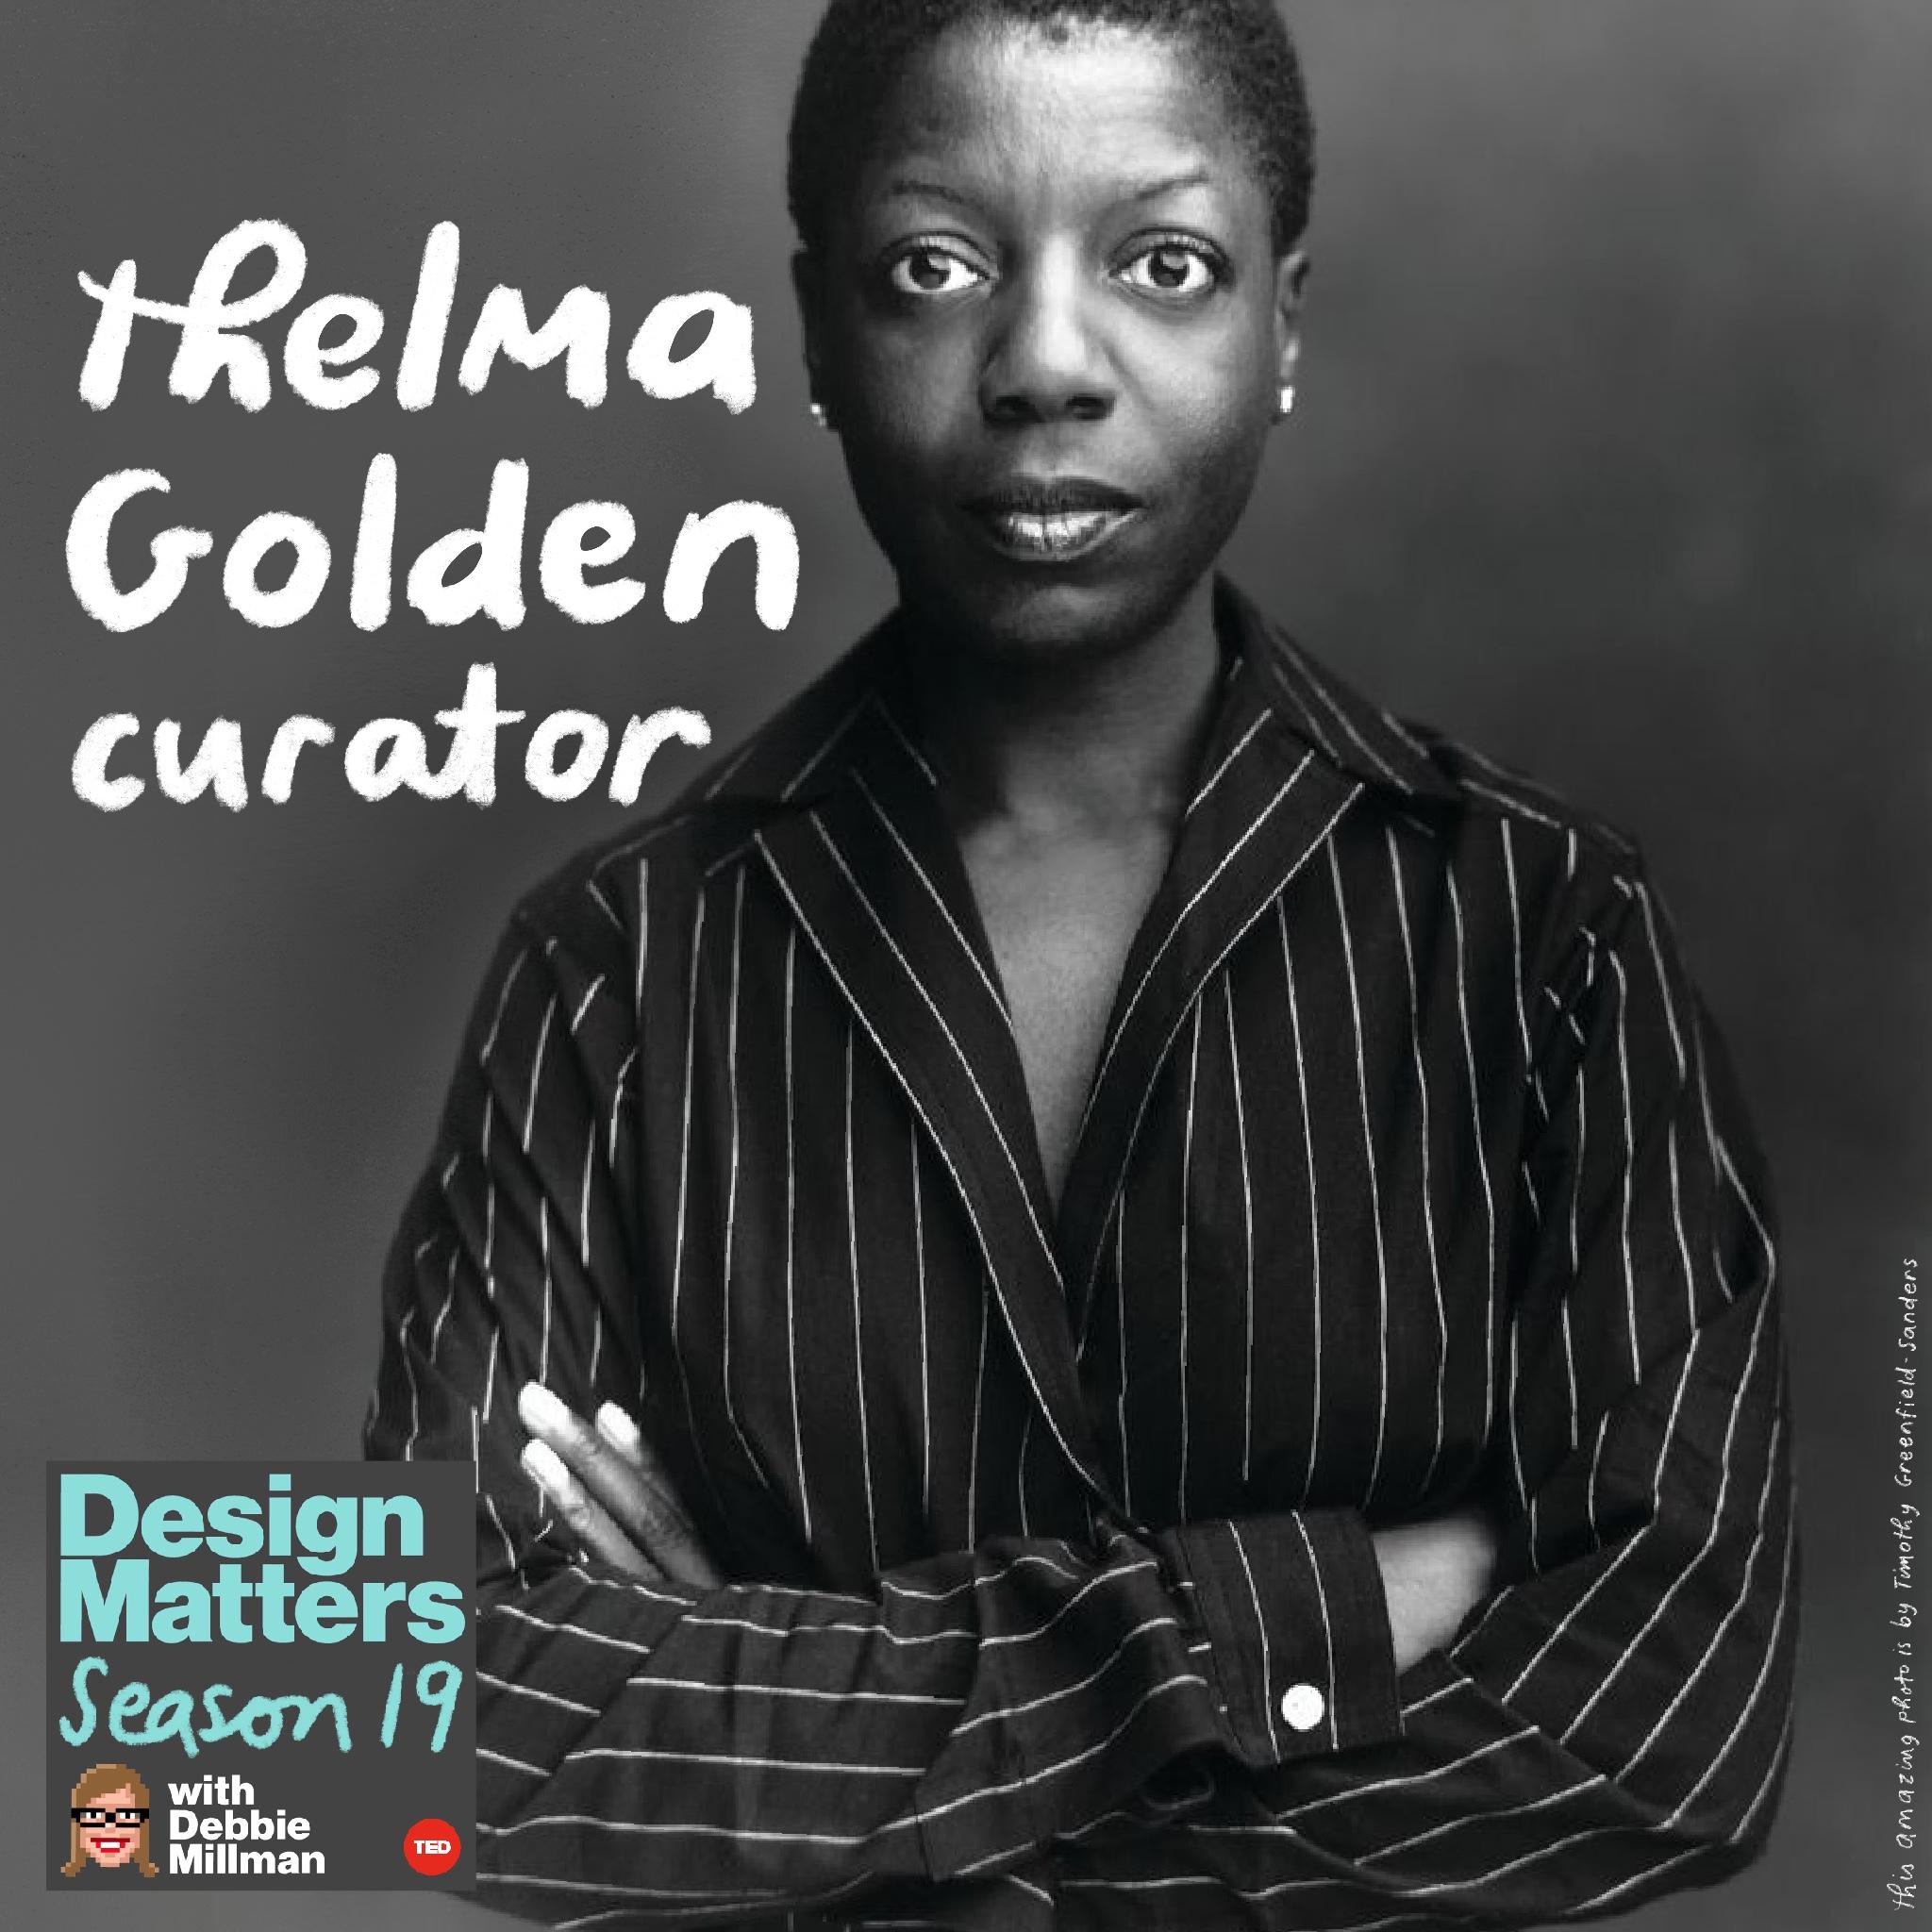 Thumbnail for "Best of Design Matters: Thelma Golden".